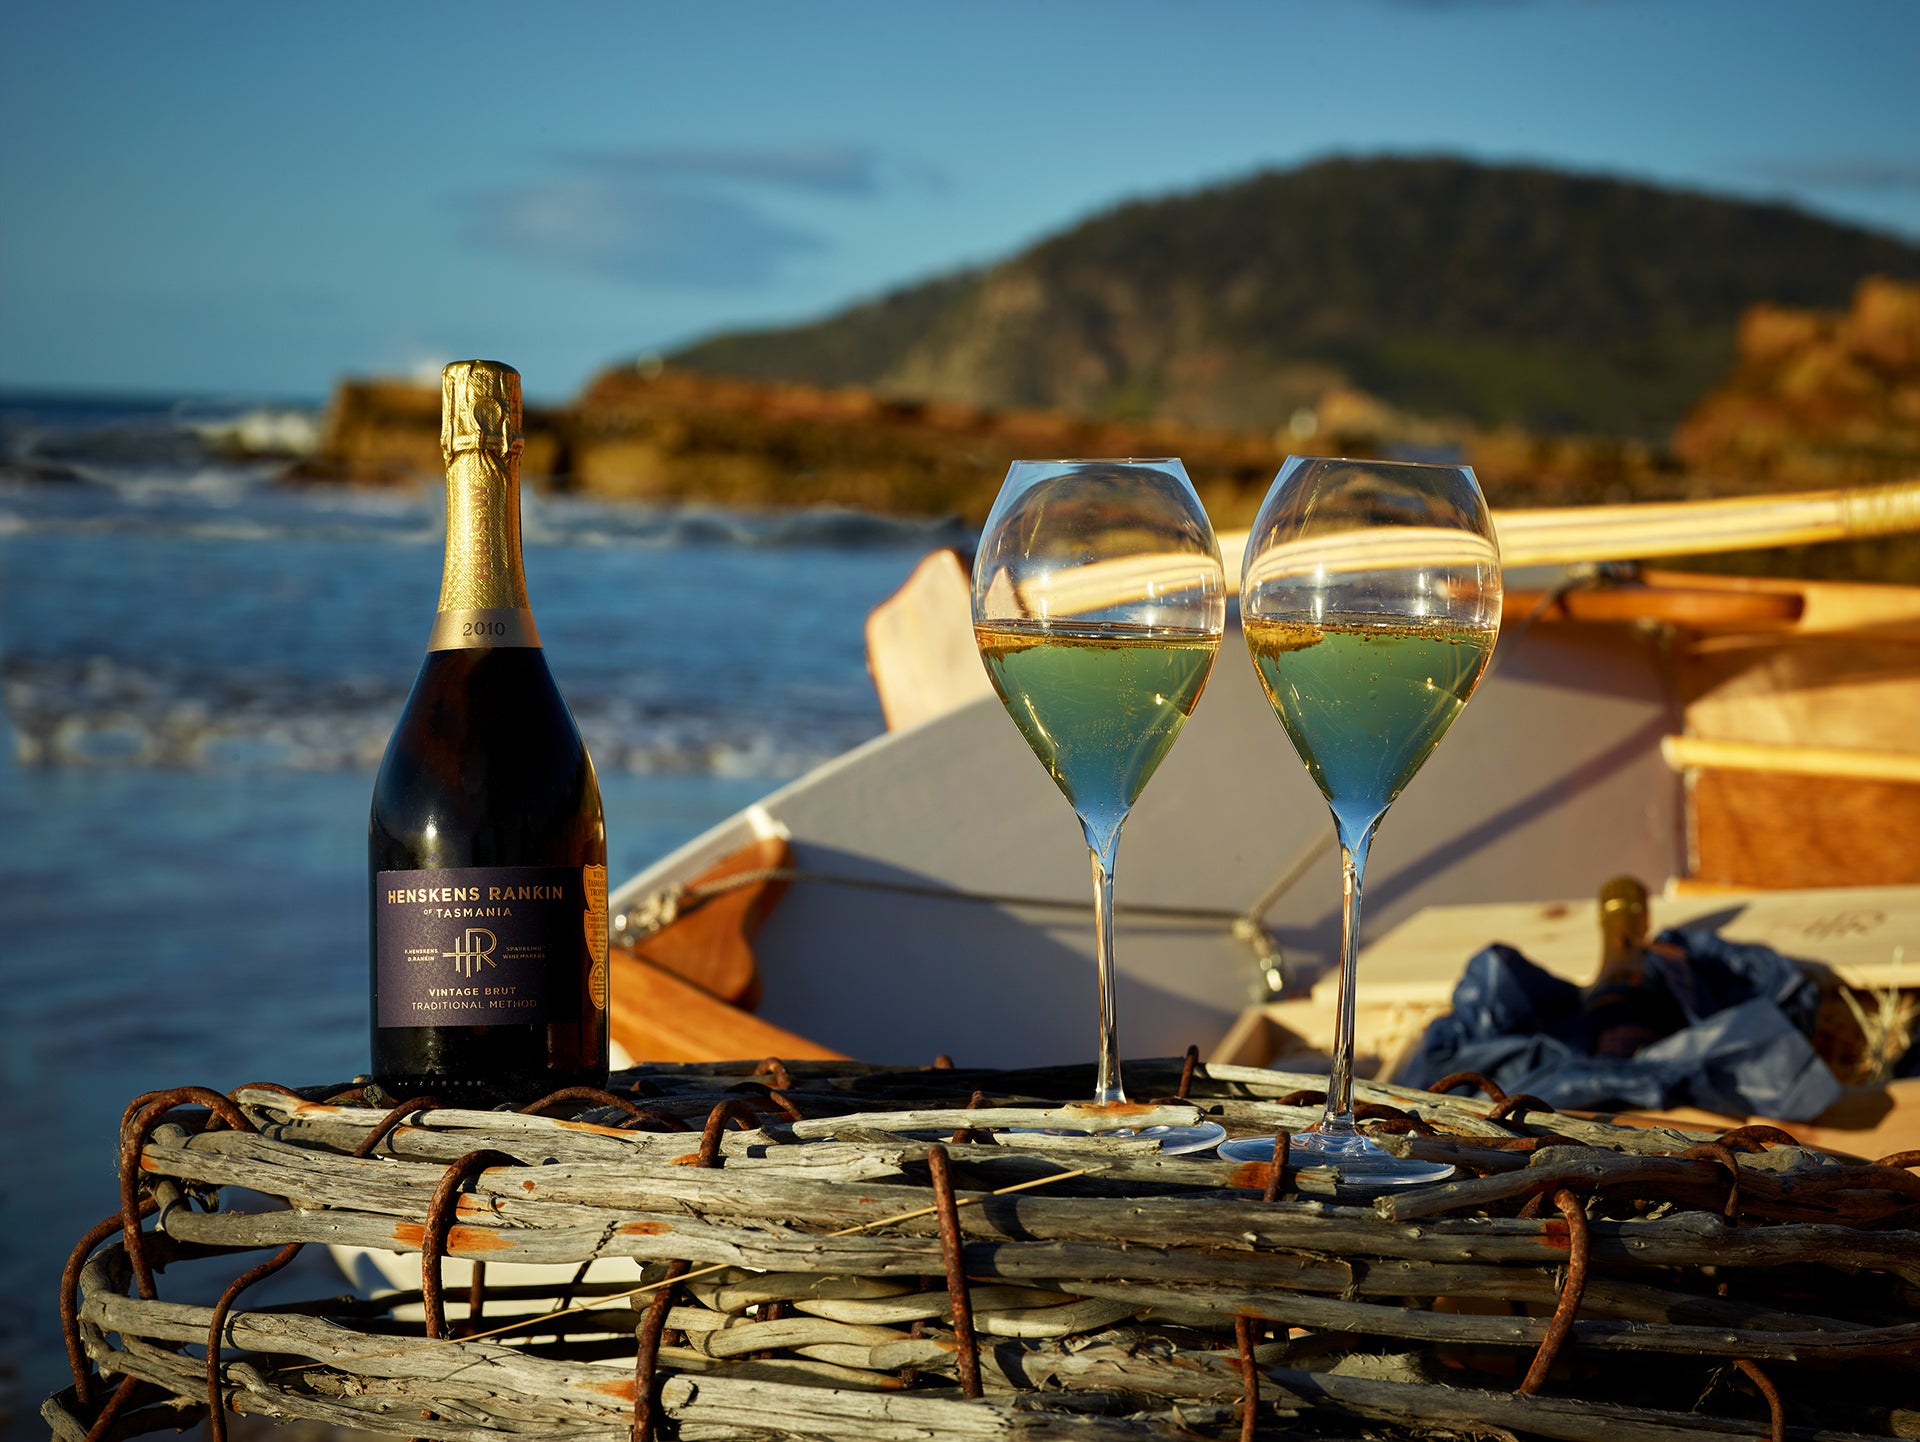 Bottle of Henskens Rankin Wine and two glasses sitting atop a crayfish pot on the beach